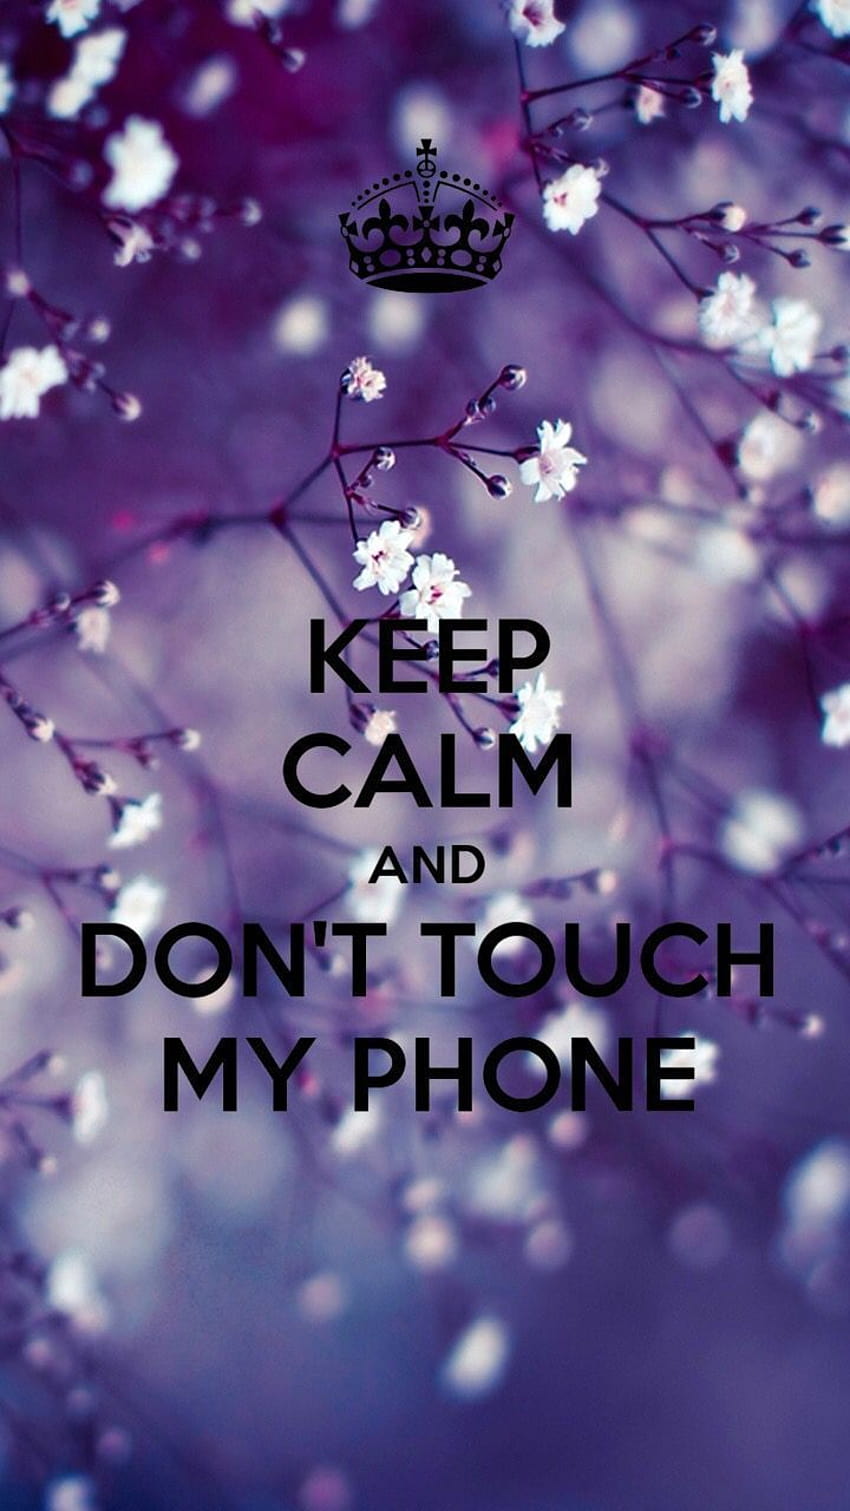 Don't Touch My Phone HD phone wallpaper